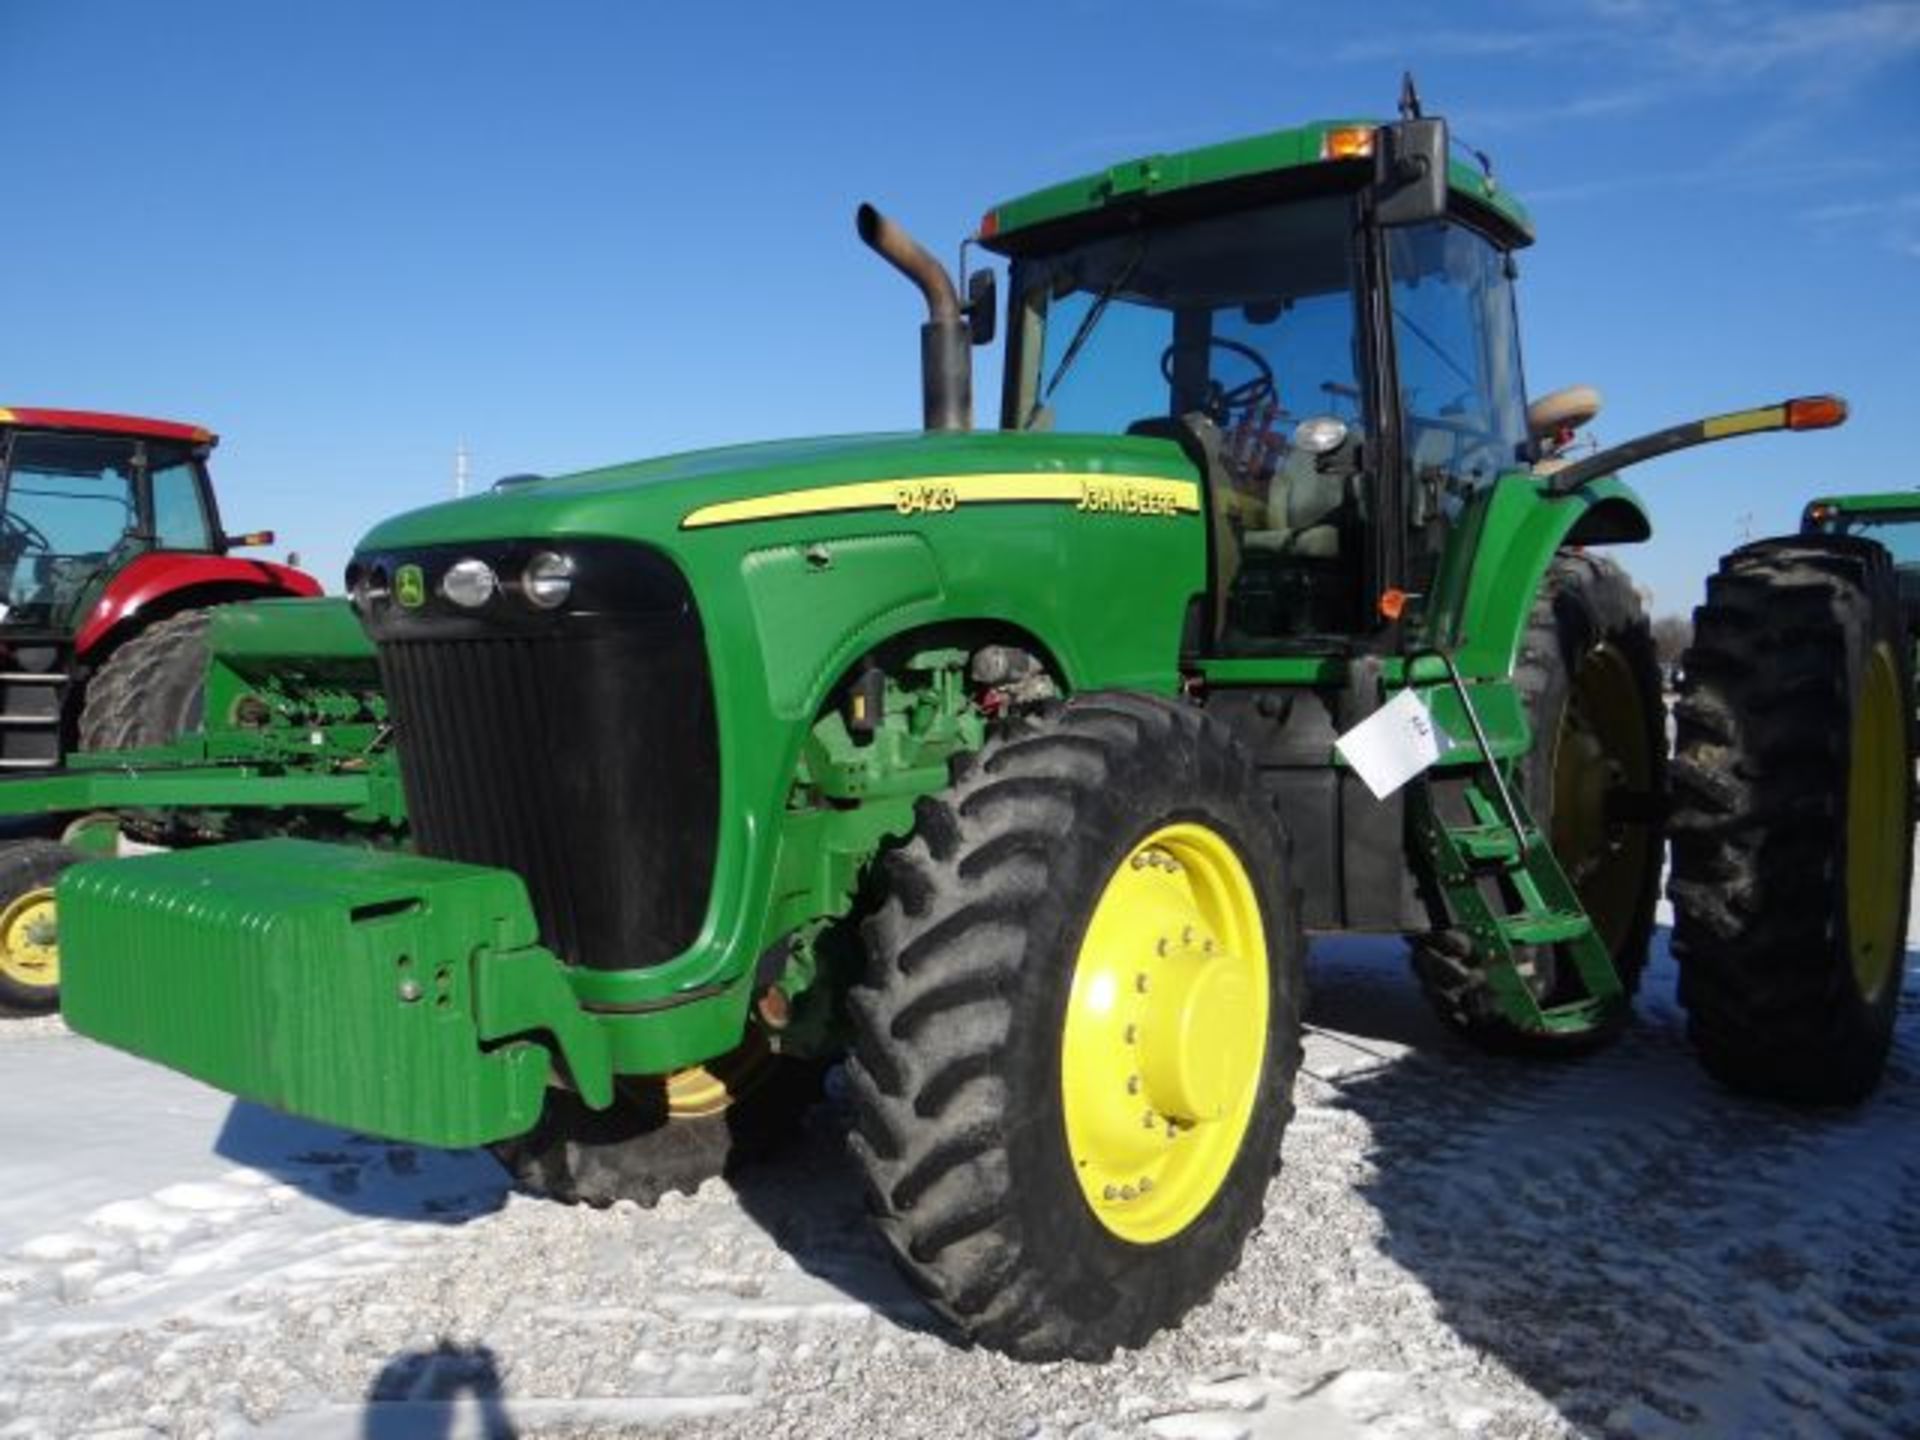 JD 8420 Tractor MFWD, 4 SCV, 18.4-46 Rear Tires, AutoTrac Ready, 6631hrs - Image 2 of 5